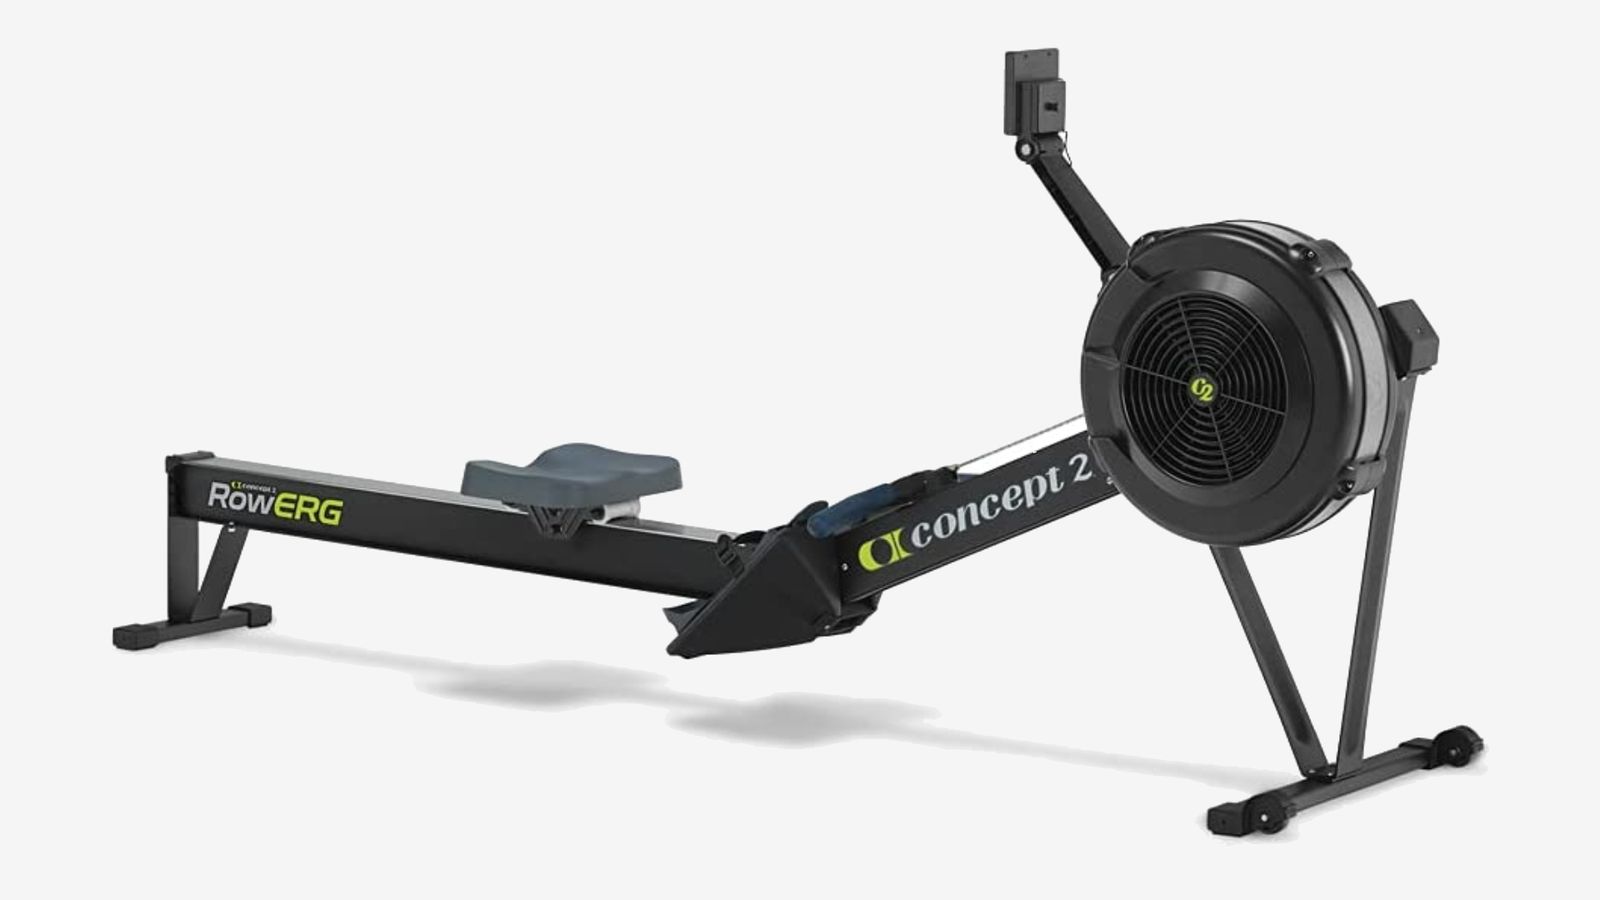 Concept2 RowErg product image of a black fan-driven rowing machine featuring white and yellow branding.